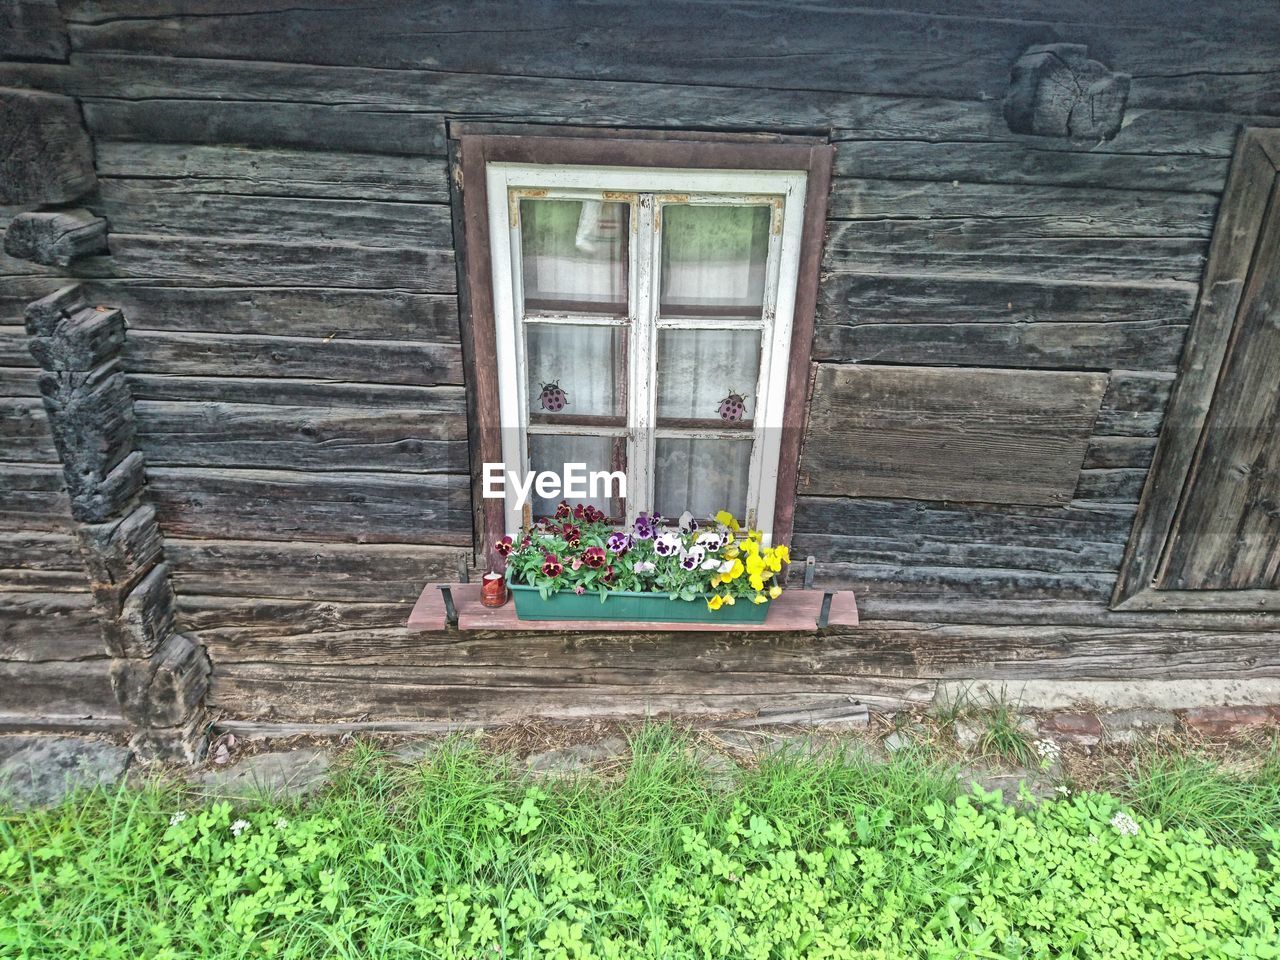 Flower pots by window of old wooden house